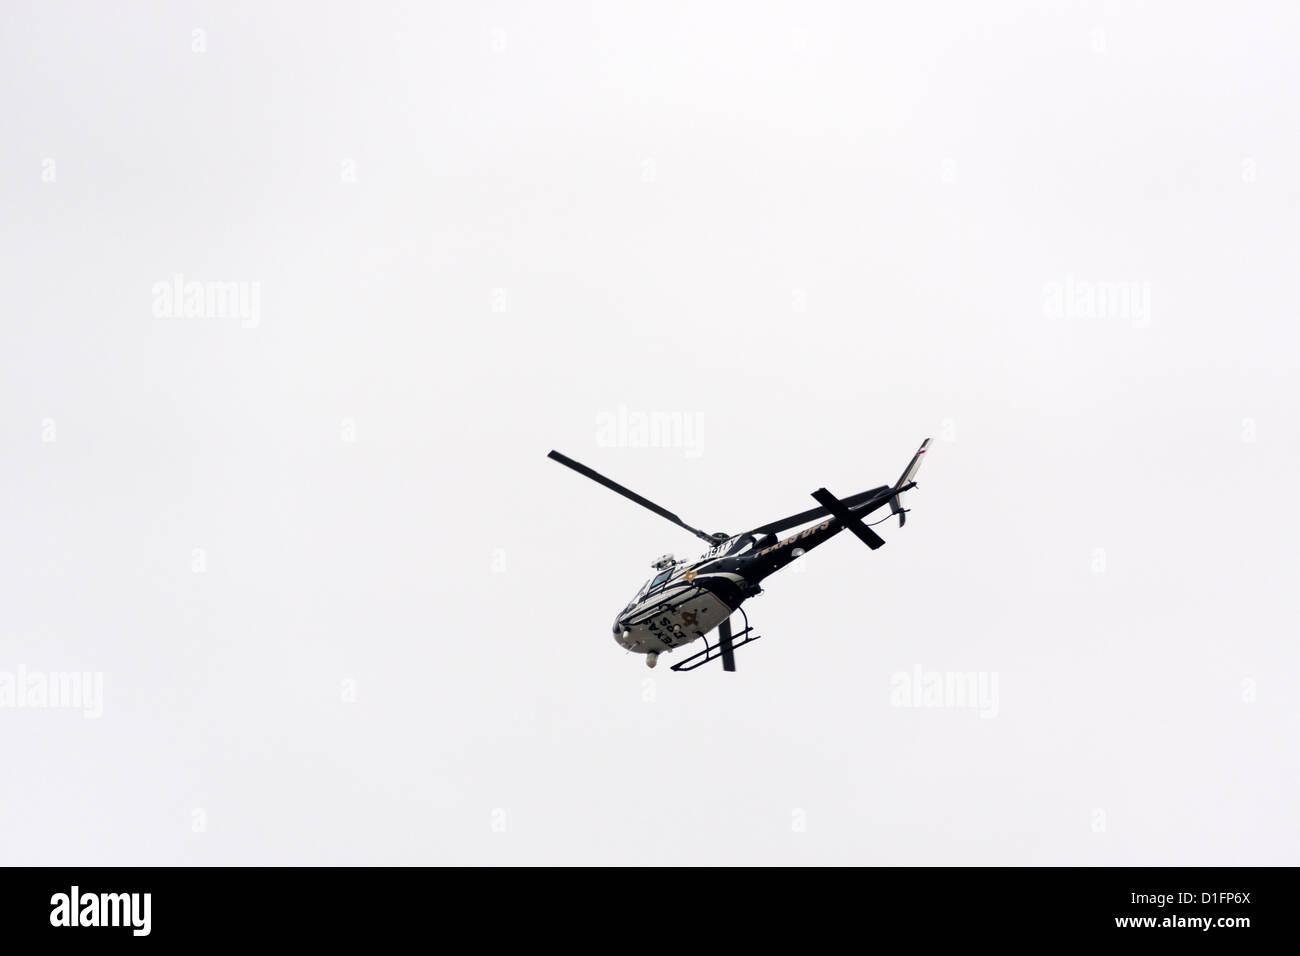 Texas Department of Public Safety helicopter hovering above Mission, Texas Stock Photo